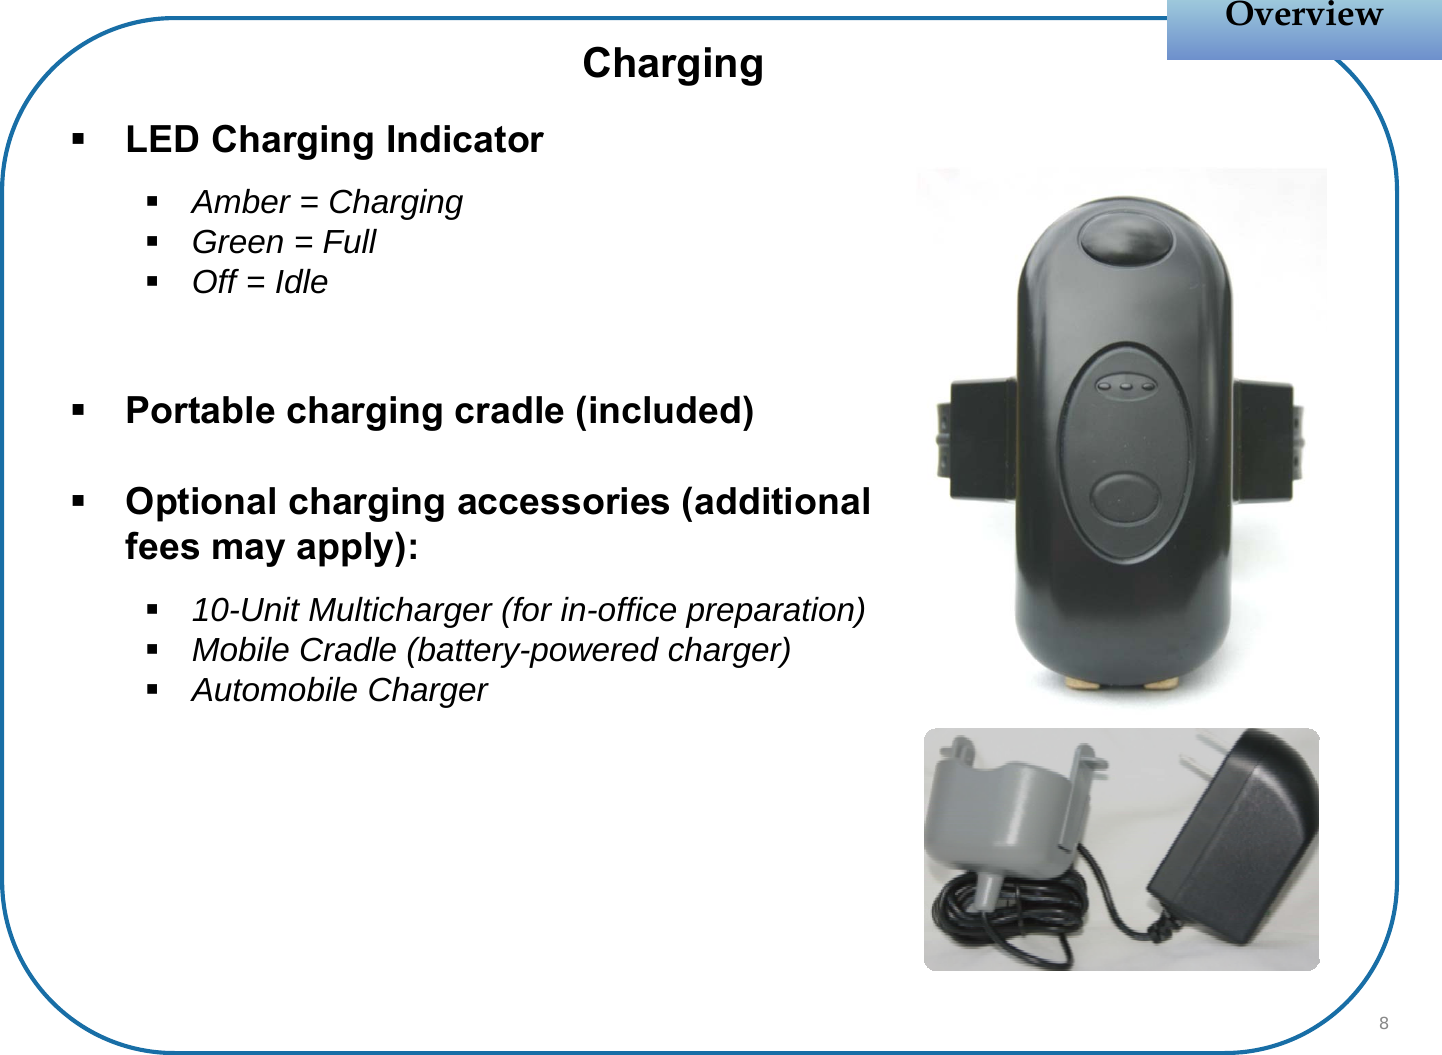 LED Charging IndicatorAmber = ChargingGreen = FullOff = IdlePortable charging cradle (included)Optional charging accessories (additional fees may apply):10-Unit Multicharger (for in-office preparation)Mobile Cradle (battery-powered charger)Automobile ChargerOverviewOverviewCharging8